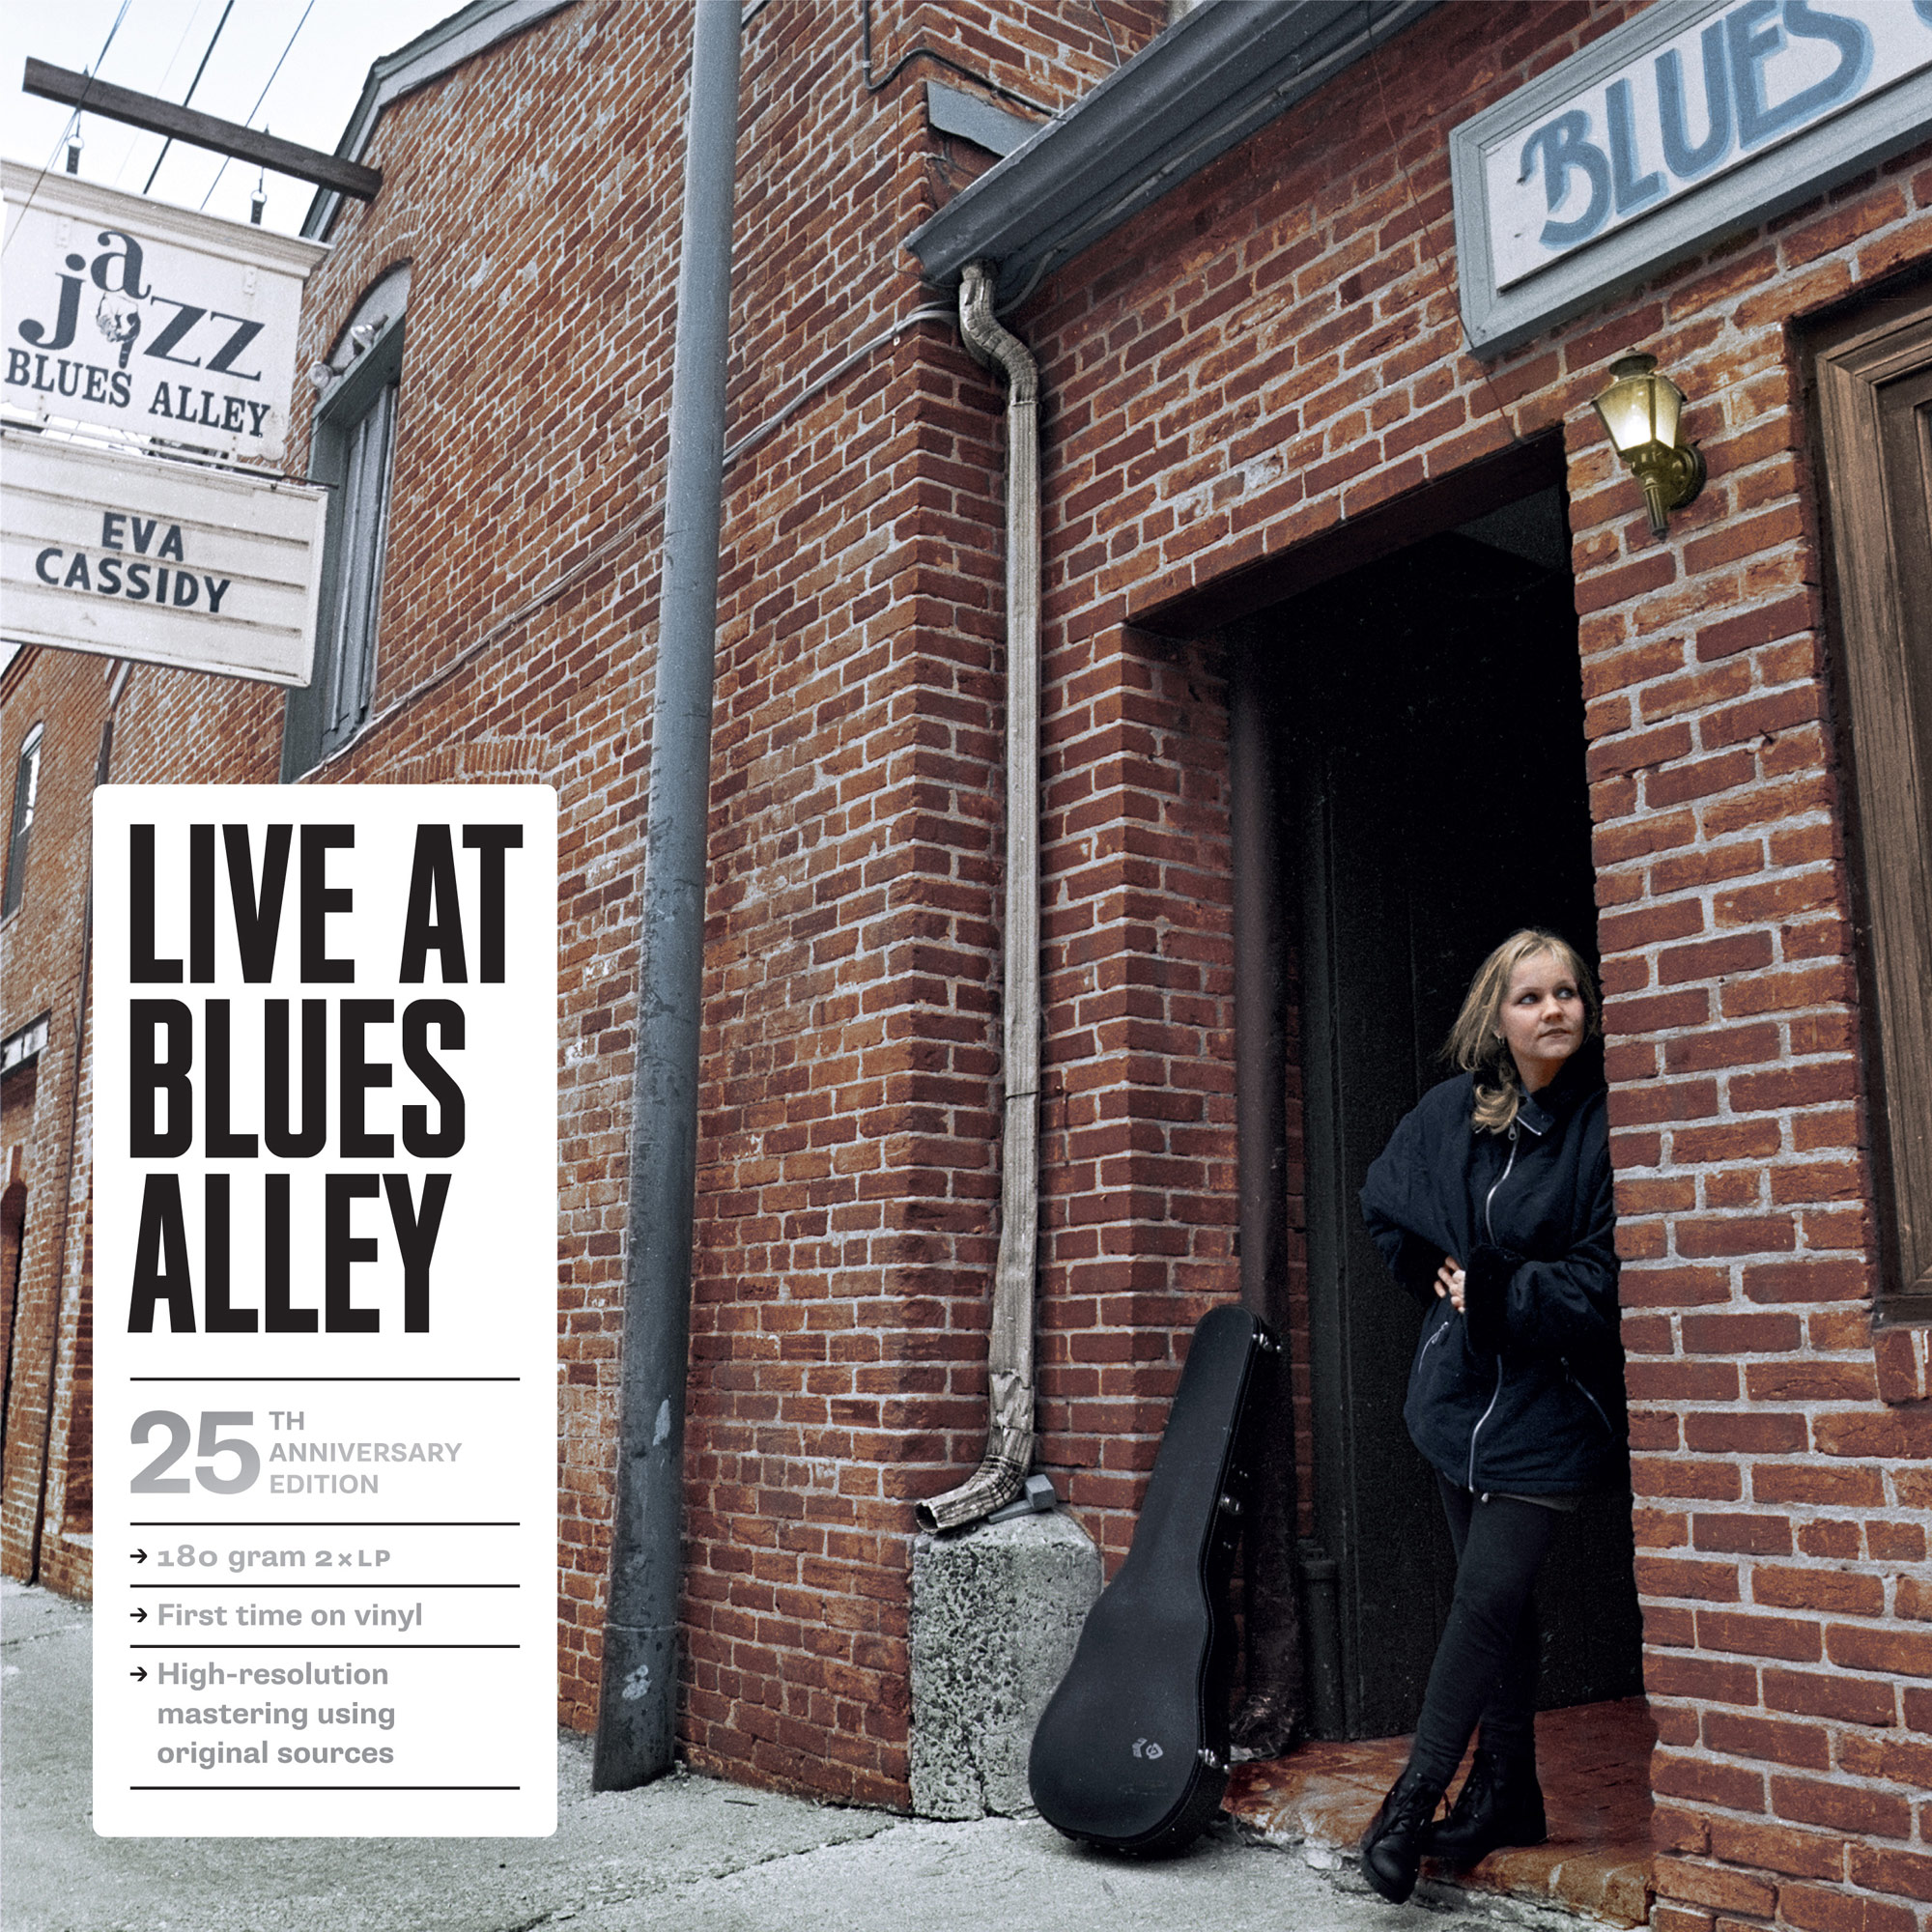 Eva Cassidy - Live at Blues Alley - 25th Anniversary